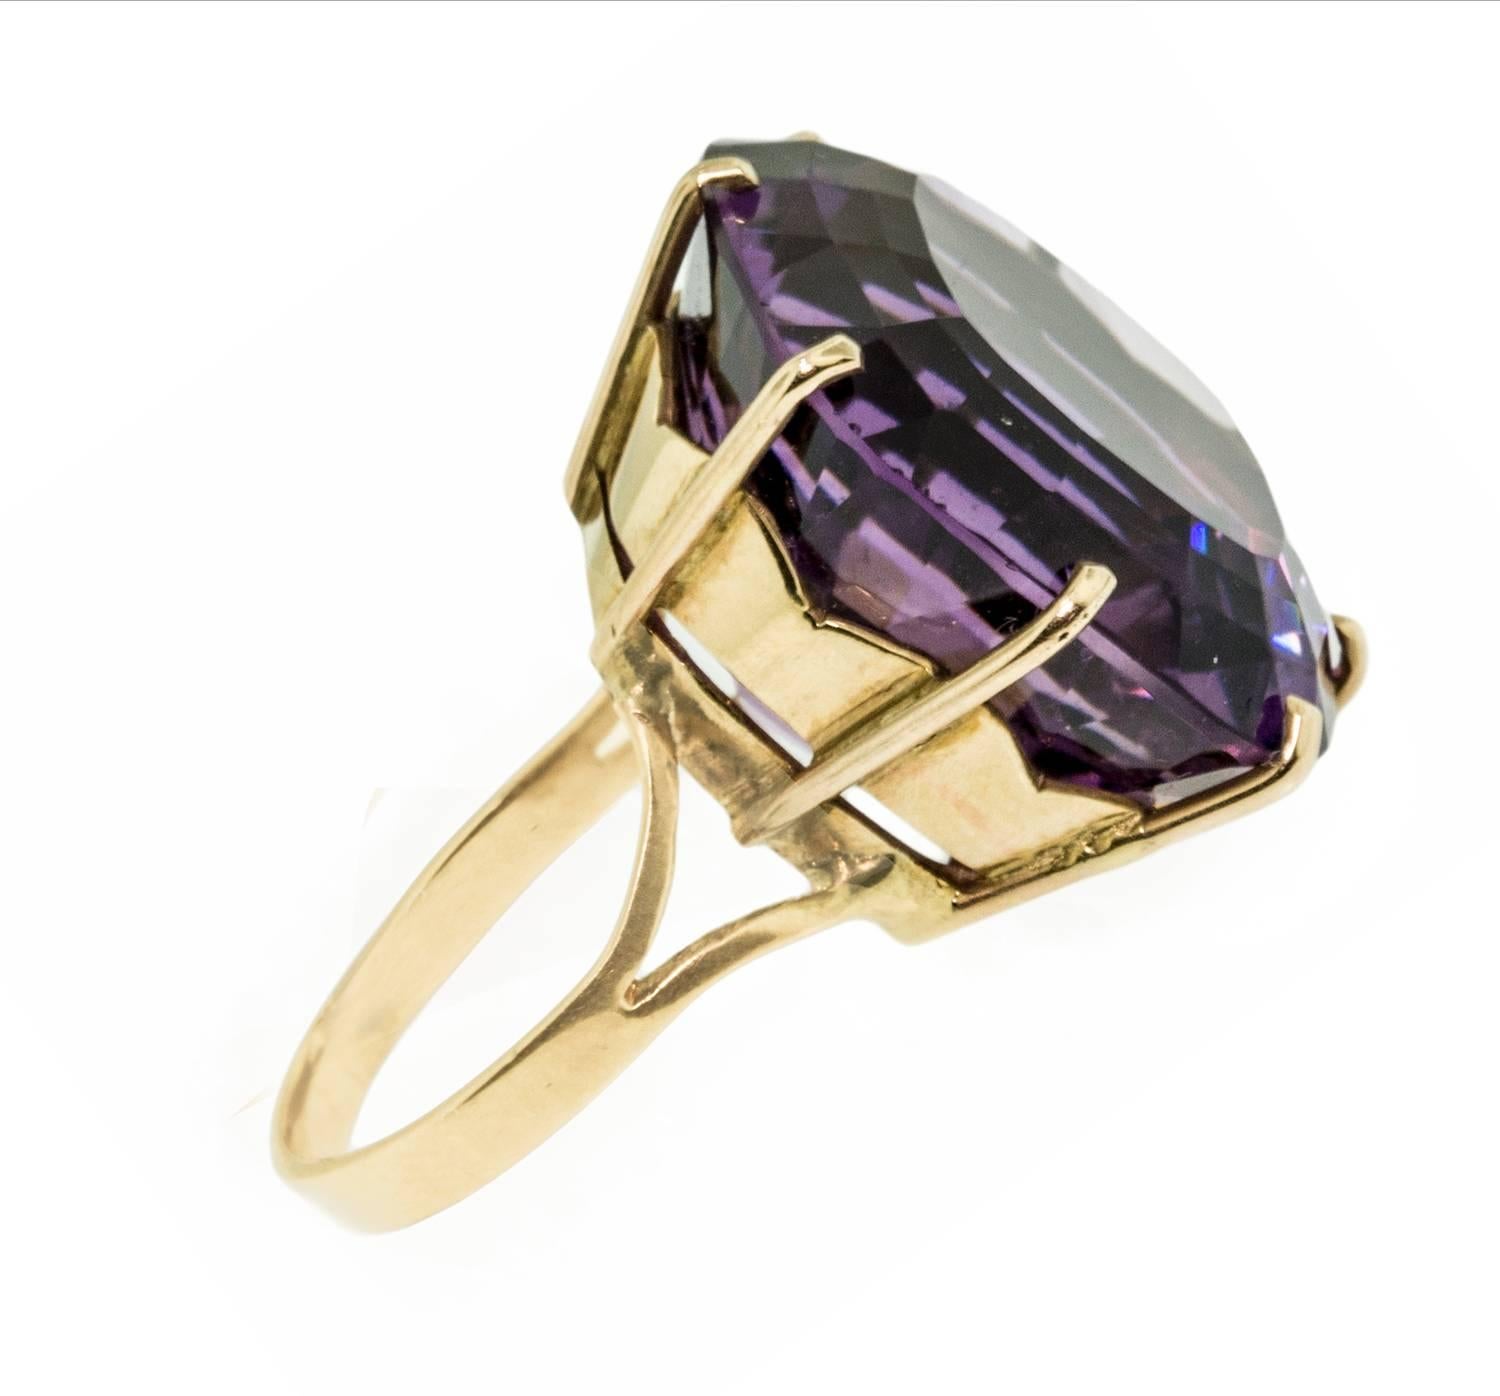 This striking ring is set in 14k yellow gold. The beautifully designed hand made mount holds a intense purple cushion cut amethyst weighing just over 32 cts. This ring measures size 5 and is in excellent condition.